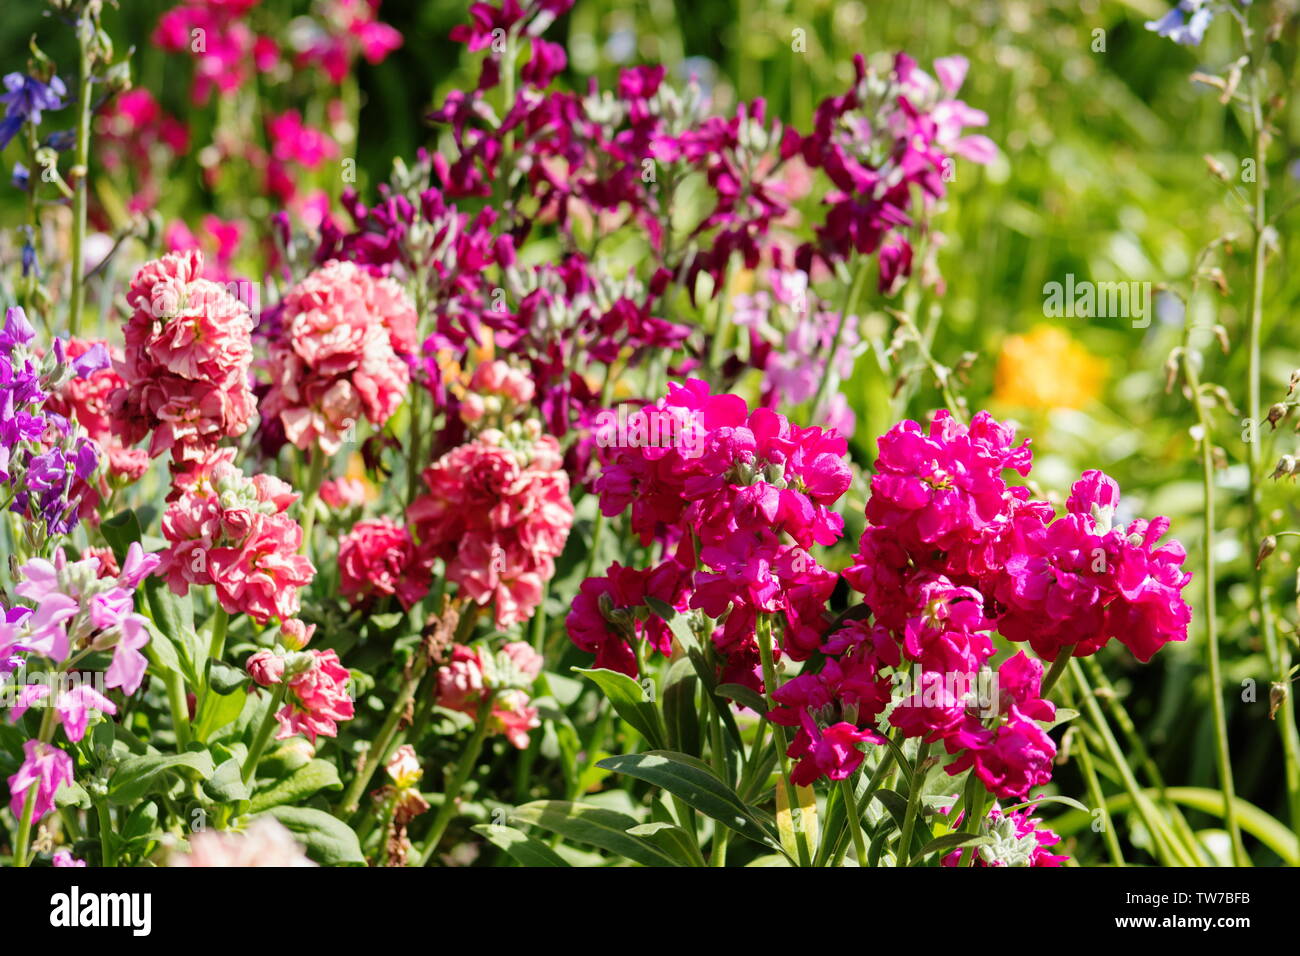 Matthiola incana, known as hoary stock, is a species of flowering plant in the genus Matthiola. Stock Photo